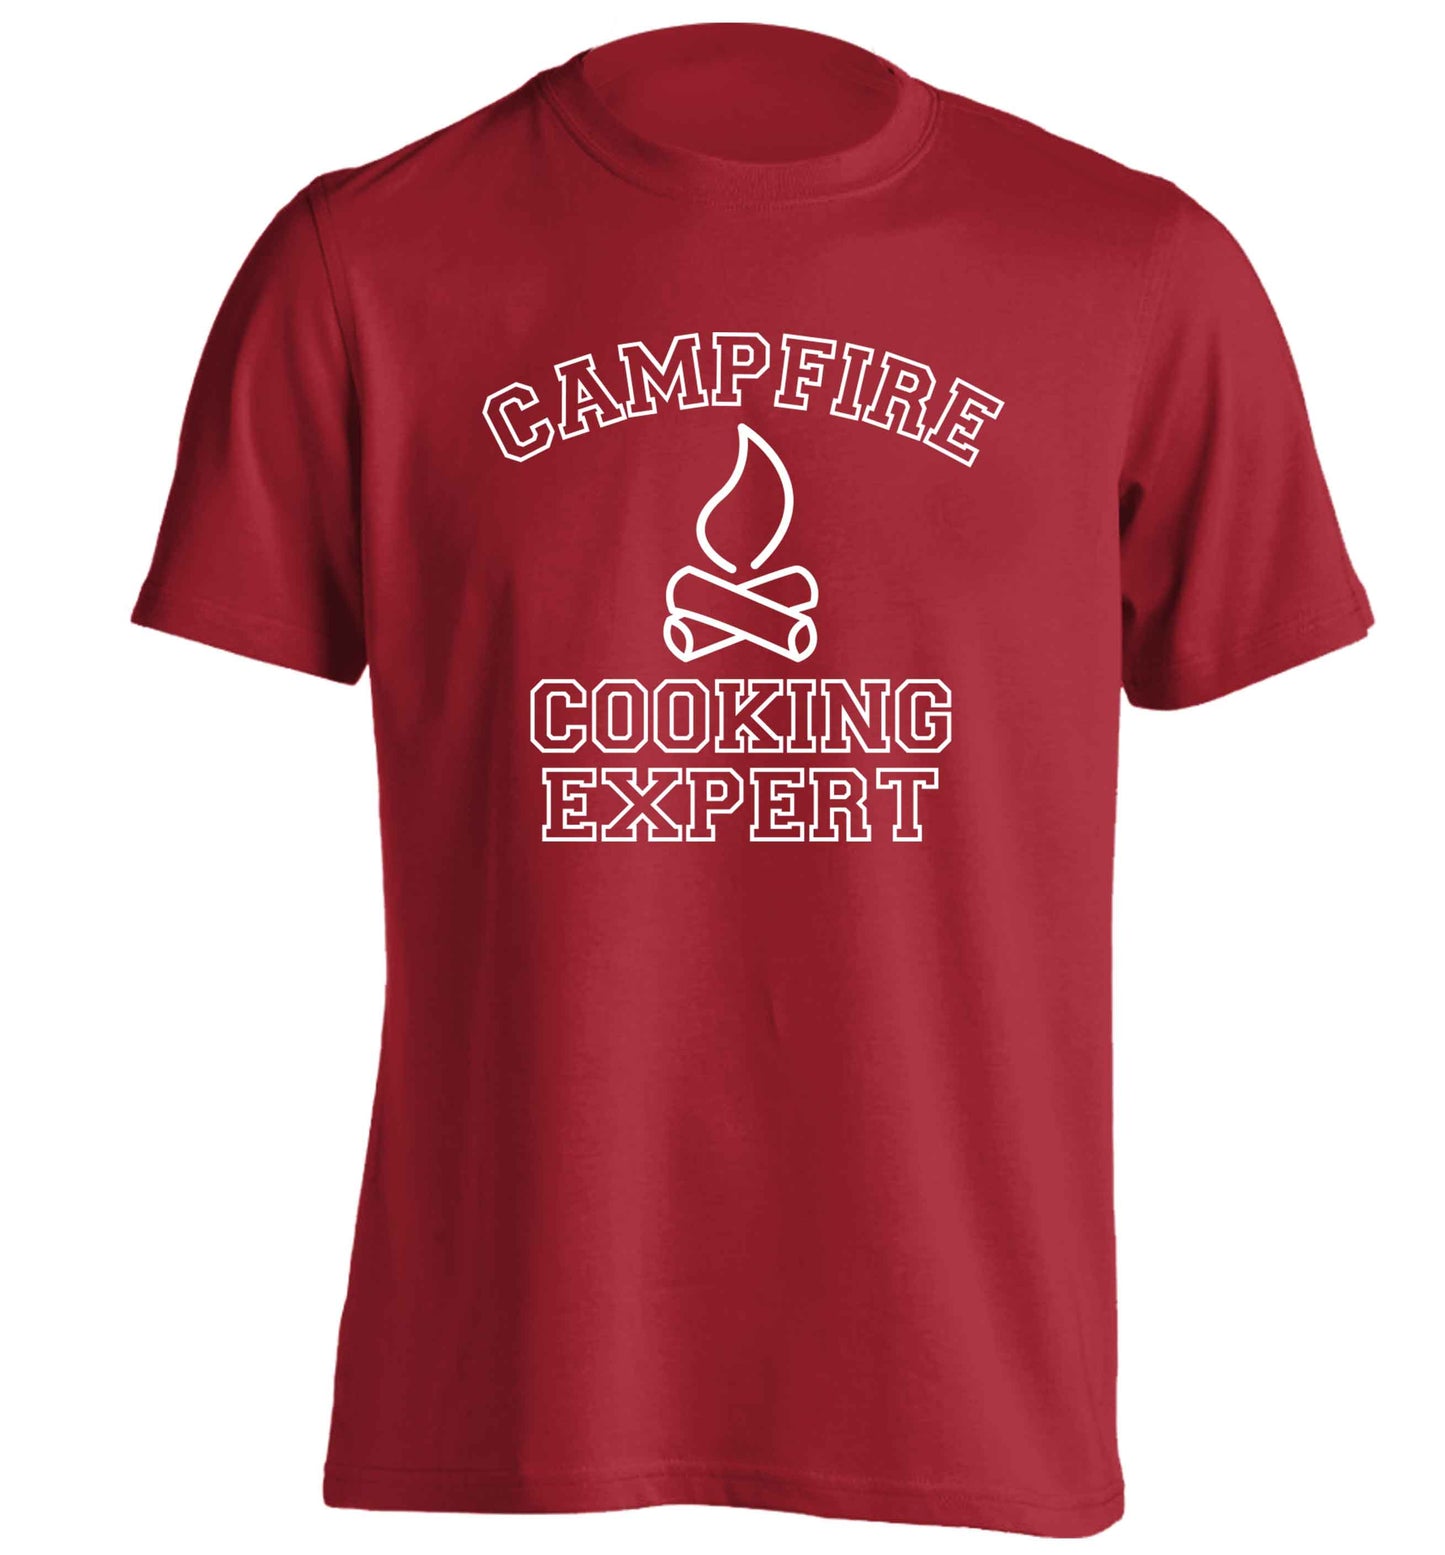 Campfire cooking expert adults unisex red Tshirt 2XL